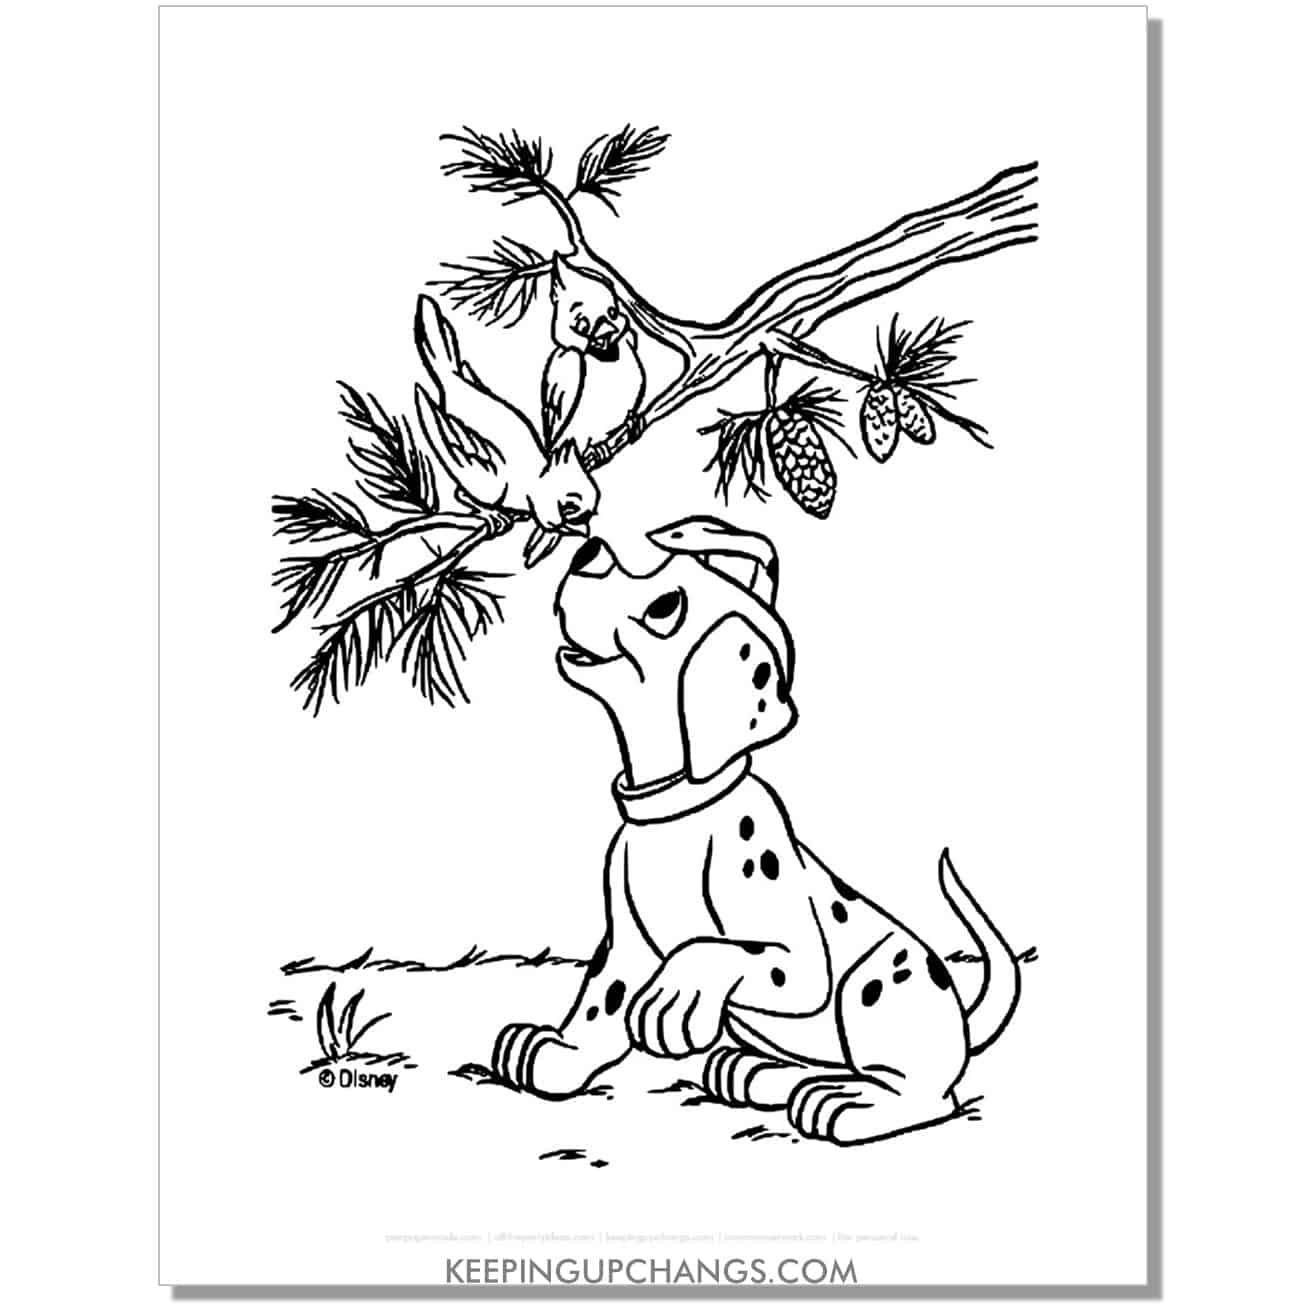 free rolly playing with cardinal in pine tree 101 dalmations coloring page, sheet.